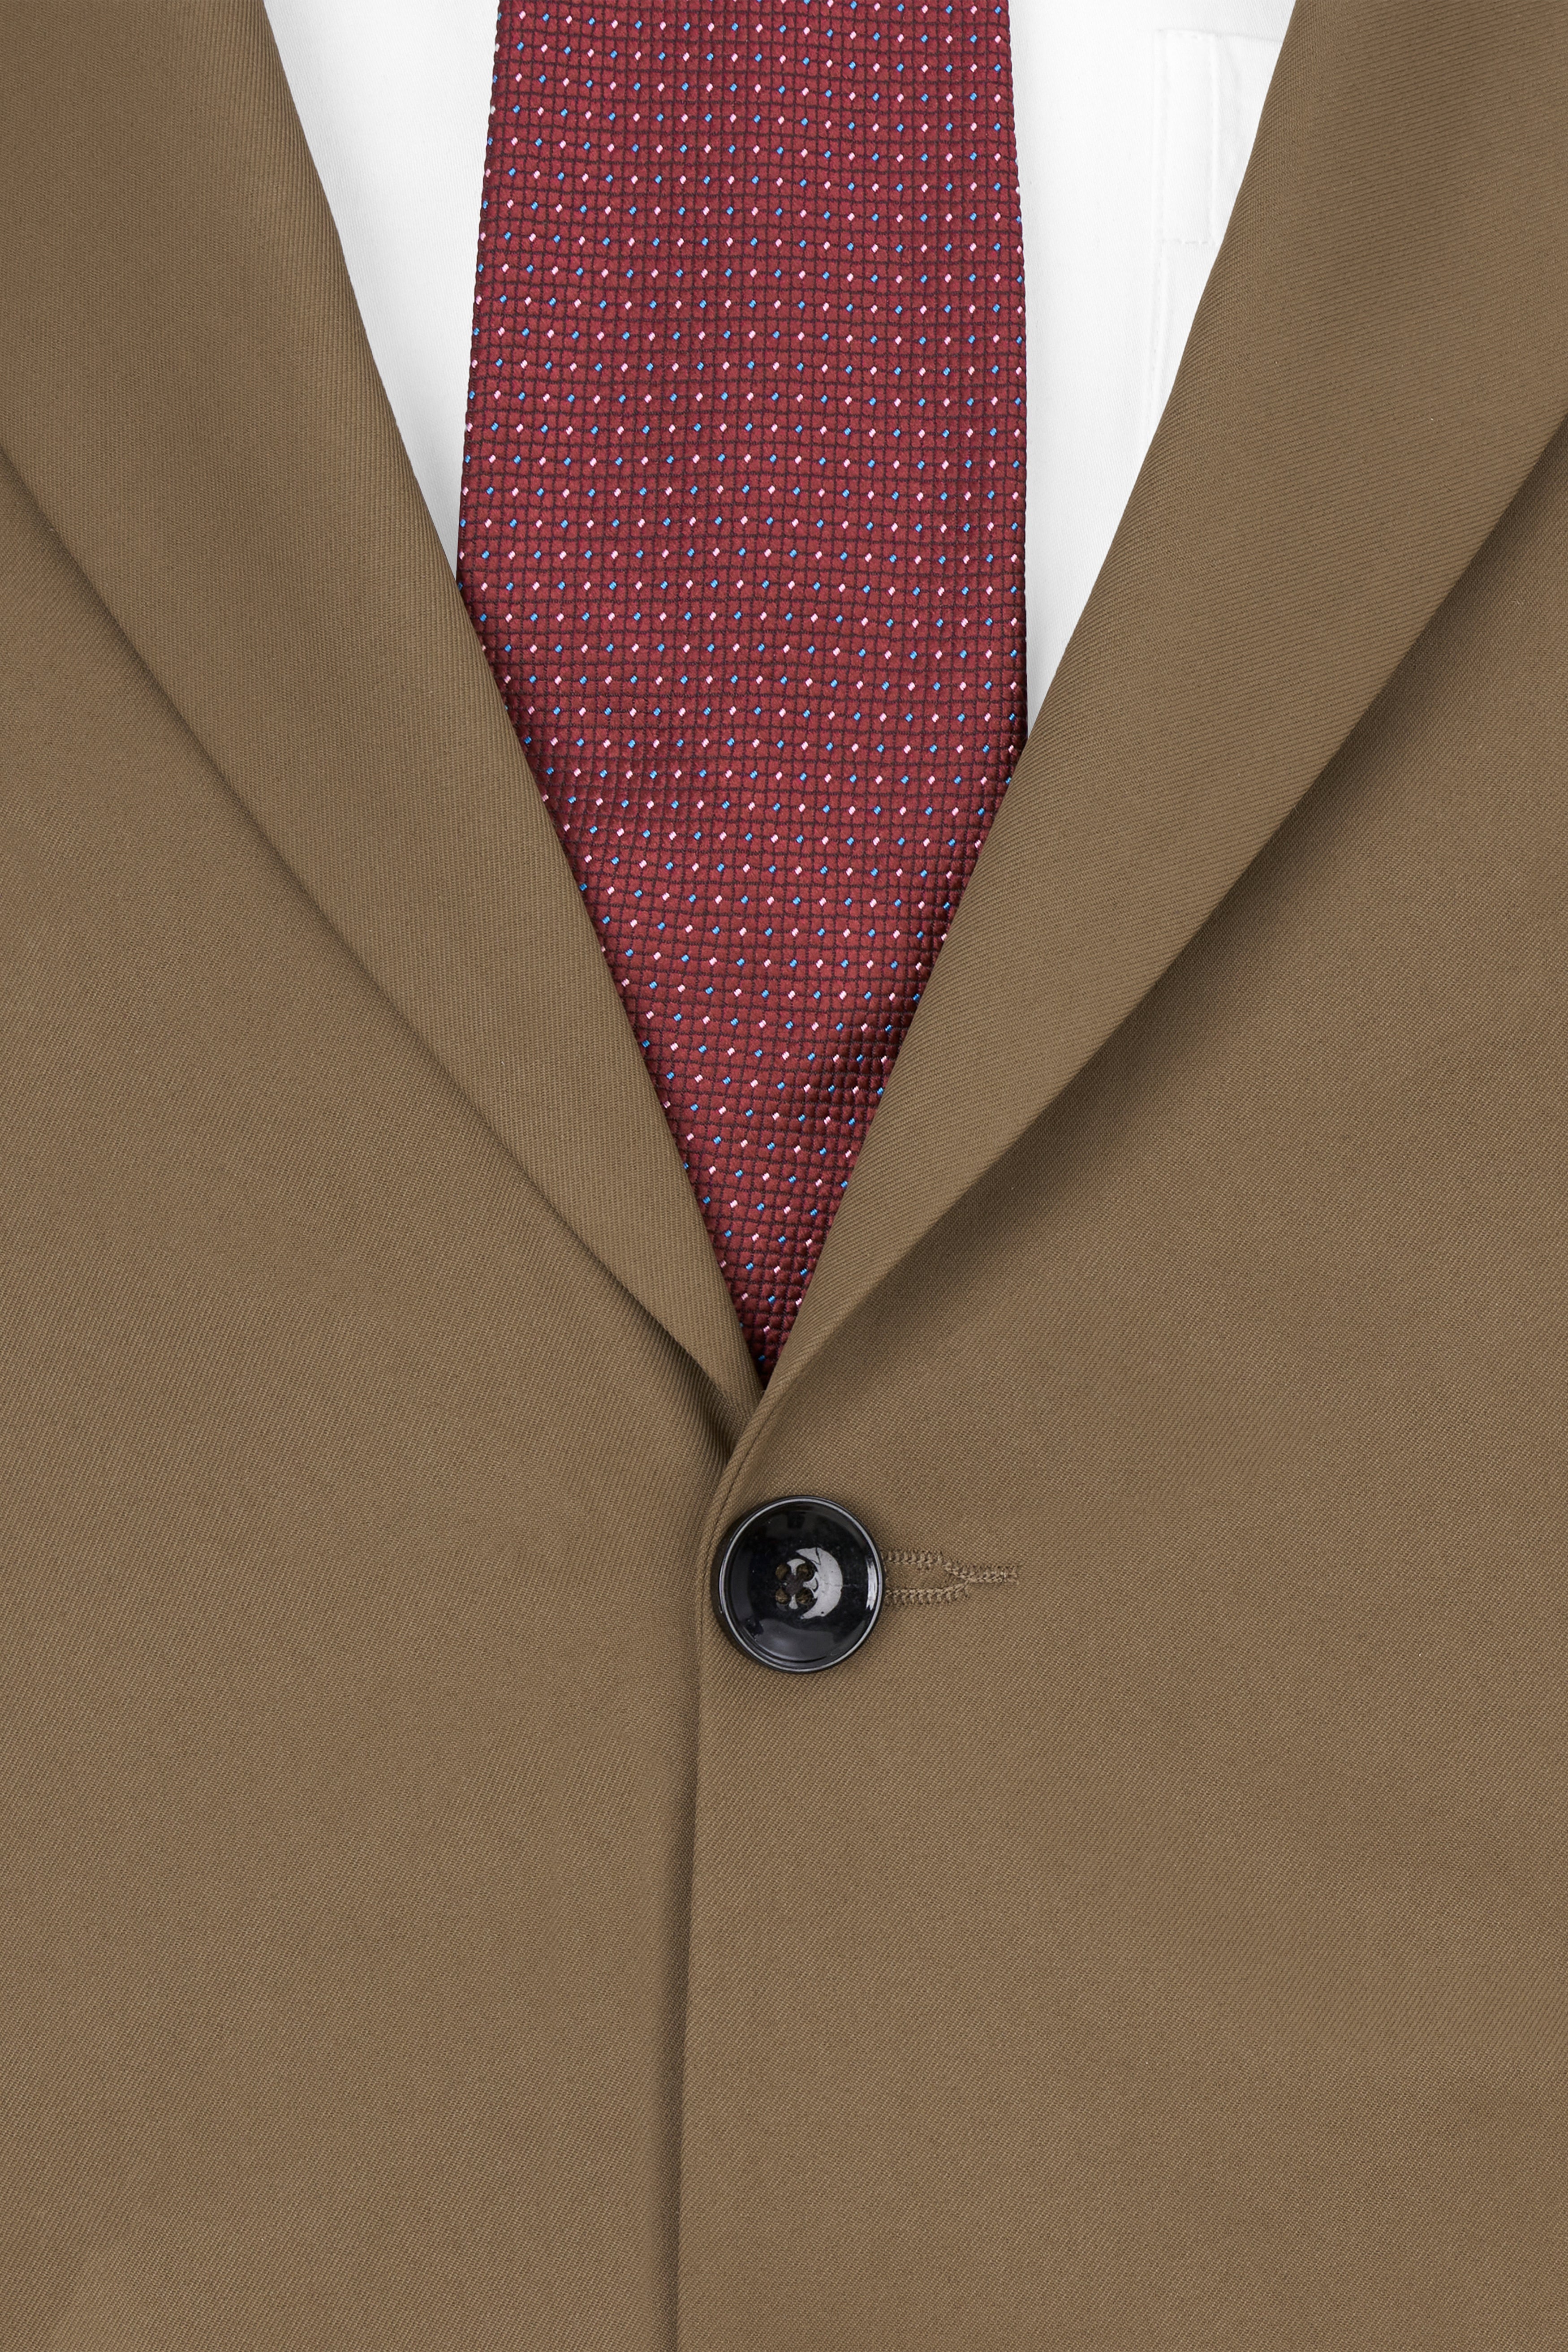 Khaki Brown Single Breasted Suit